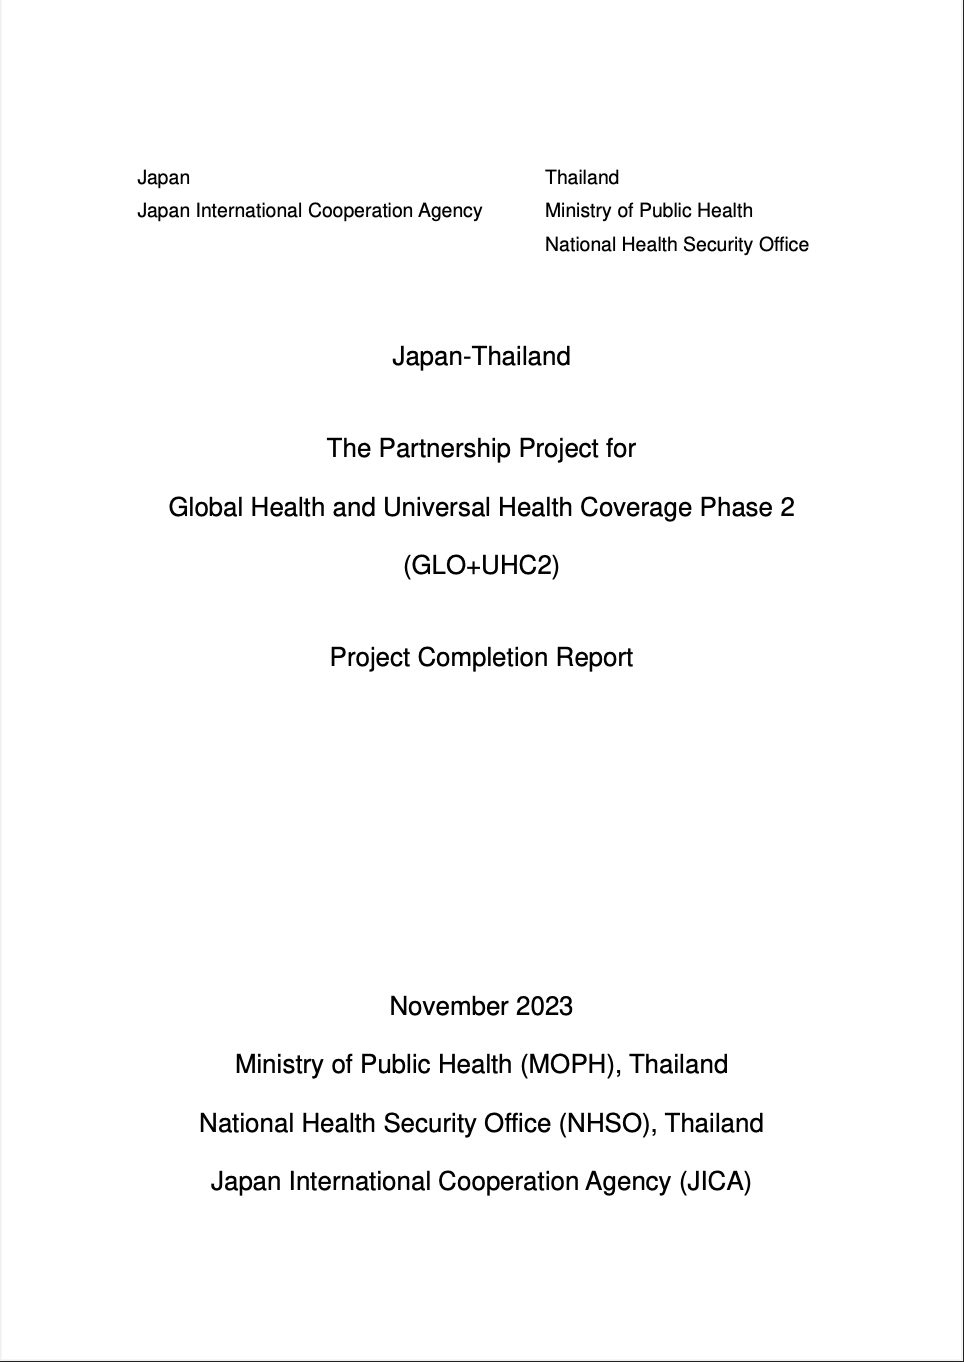 The Partnership Project for Global Health and Universal Health Coverage Phase 2